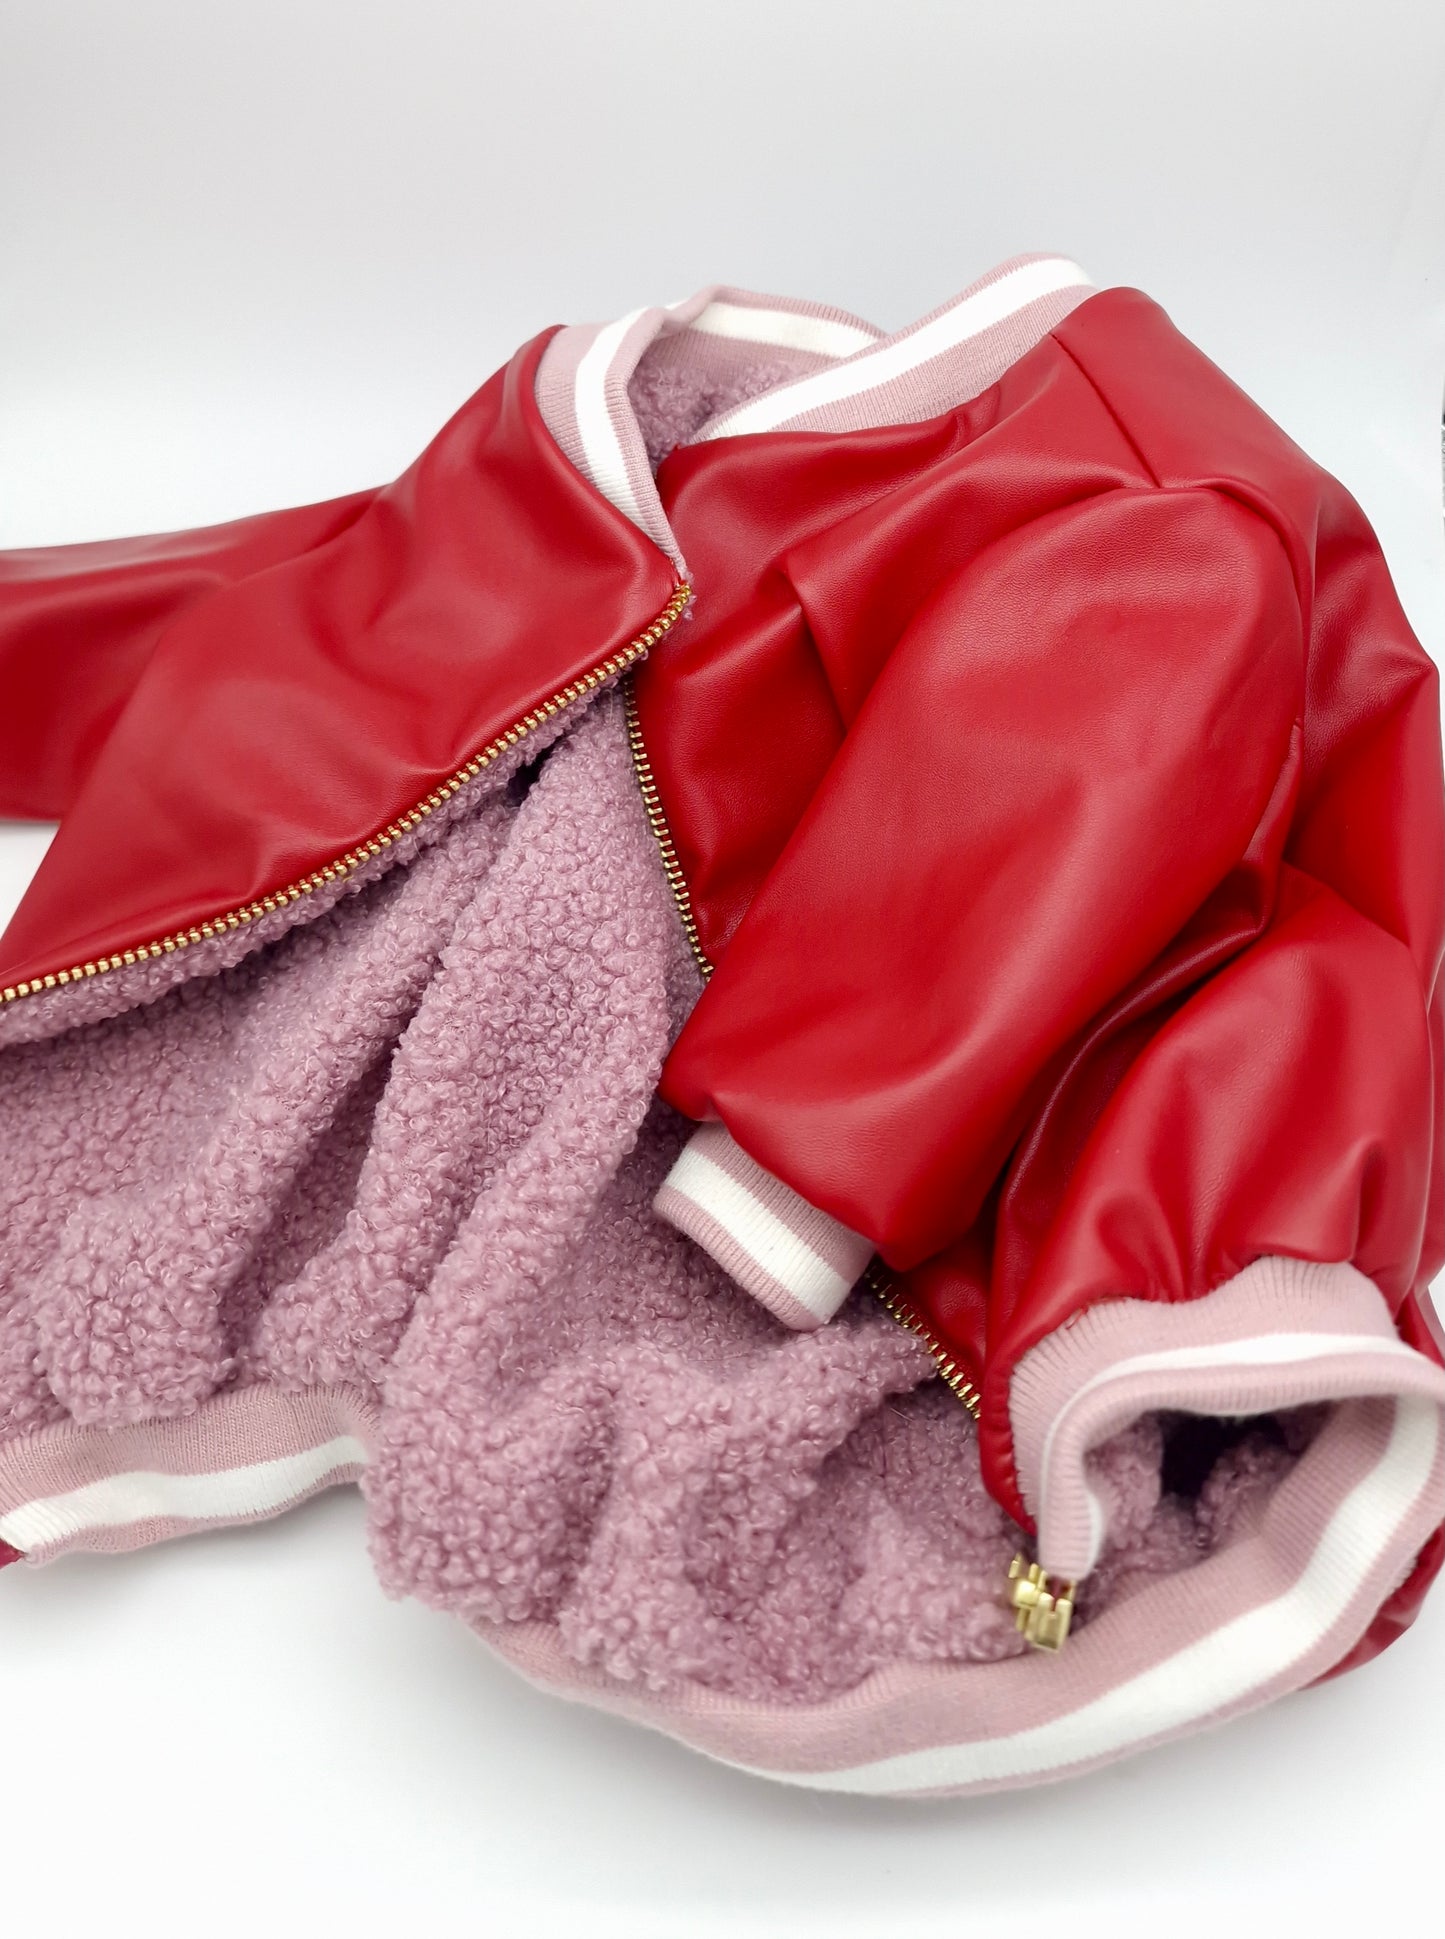 Red faux leather jacket with pink sherpa lining